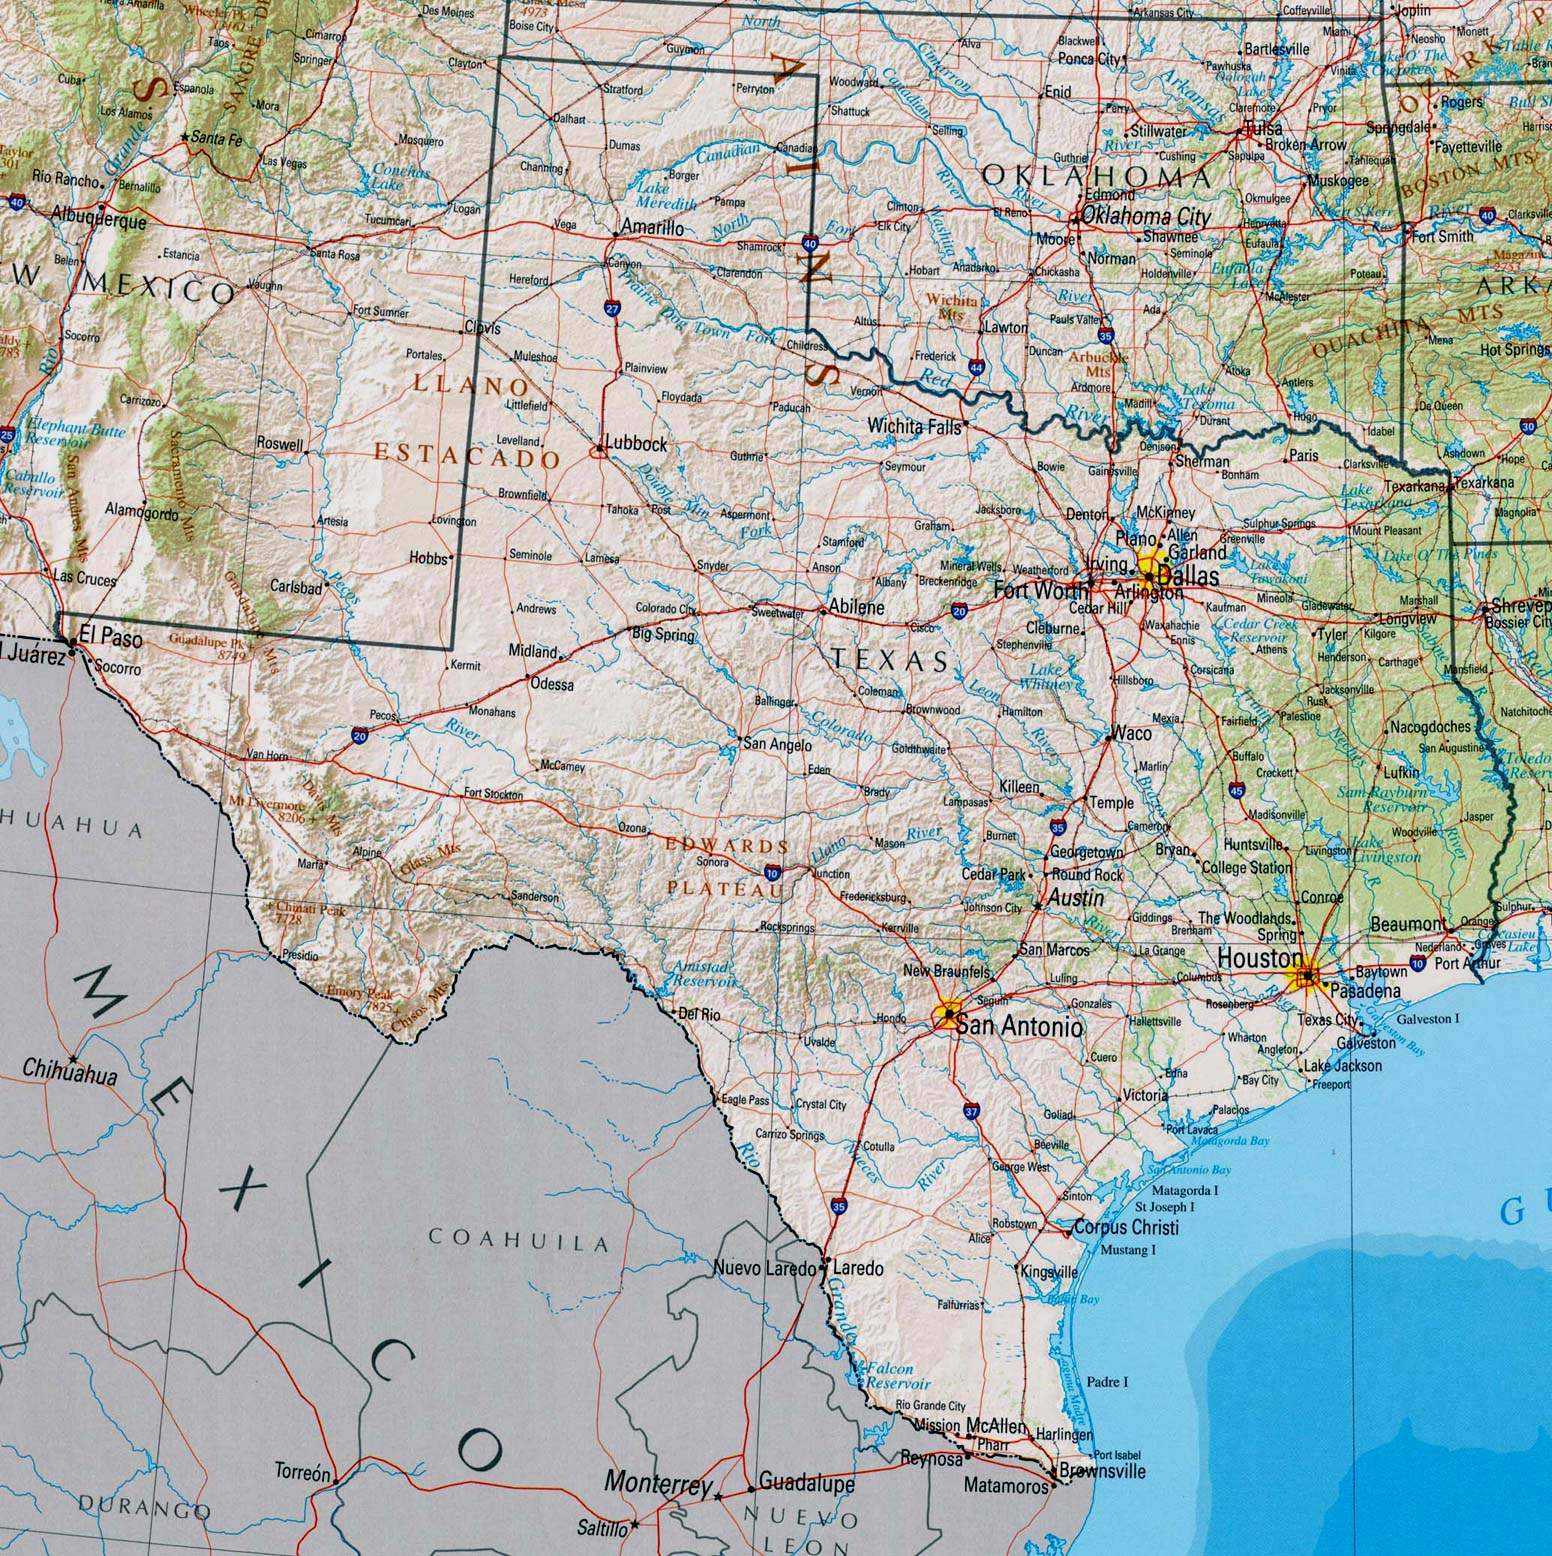 Large Texas Maps For Free Download And Print | High-Resolution And - Google Maps Pasadena Texas